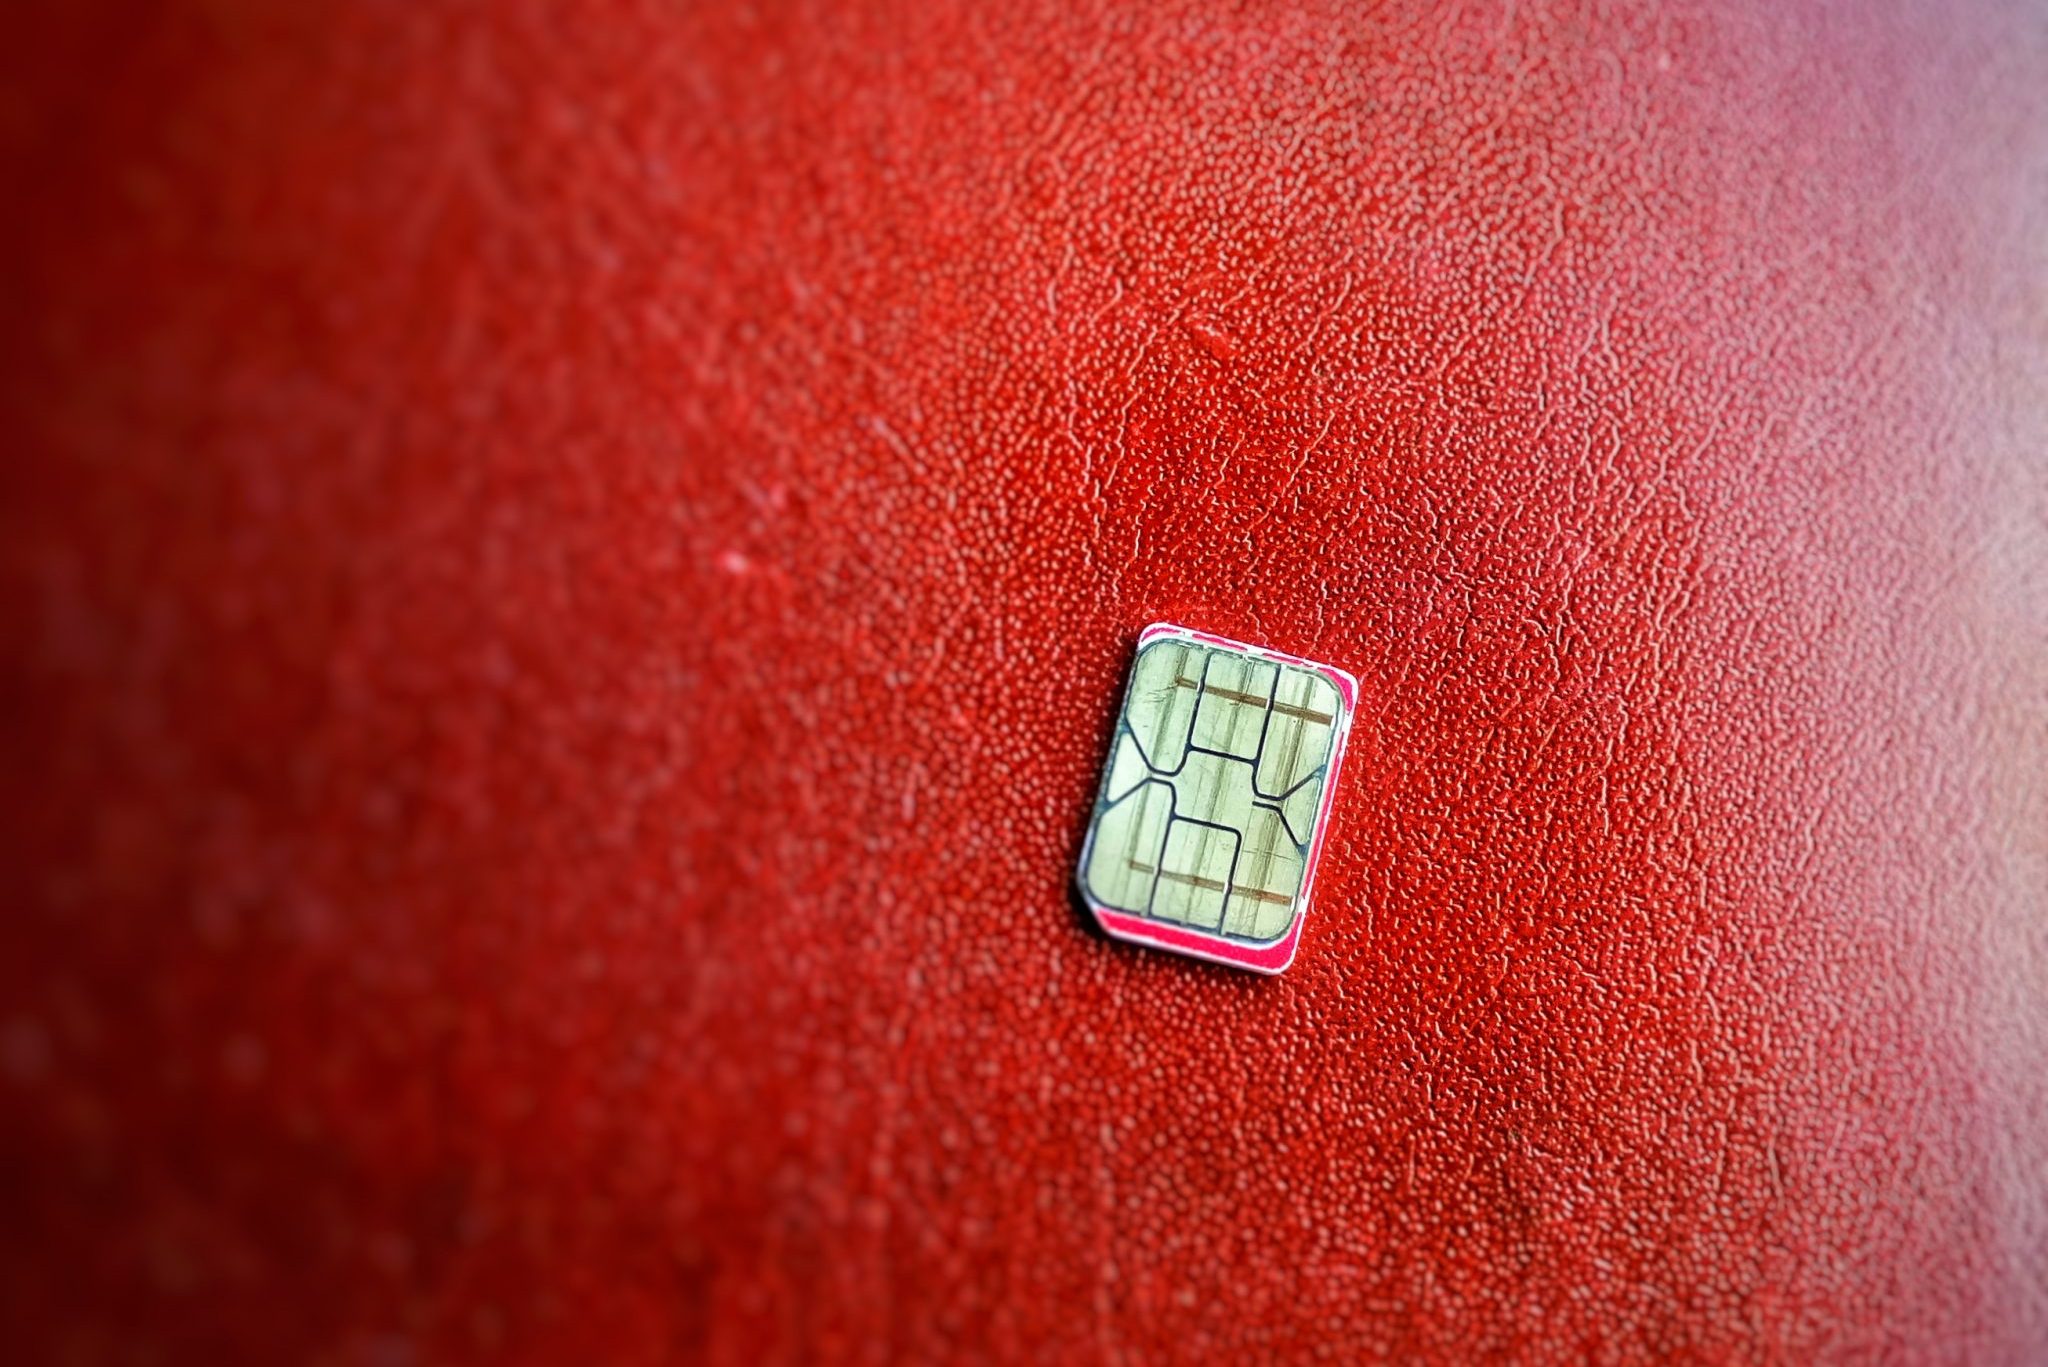 SIM card on red surface